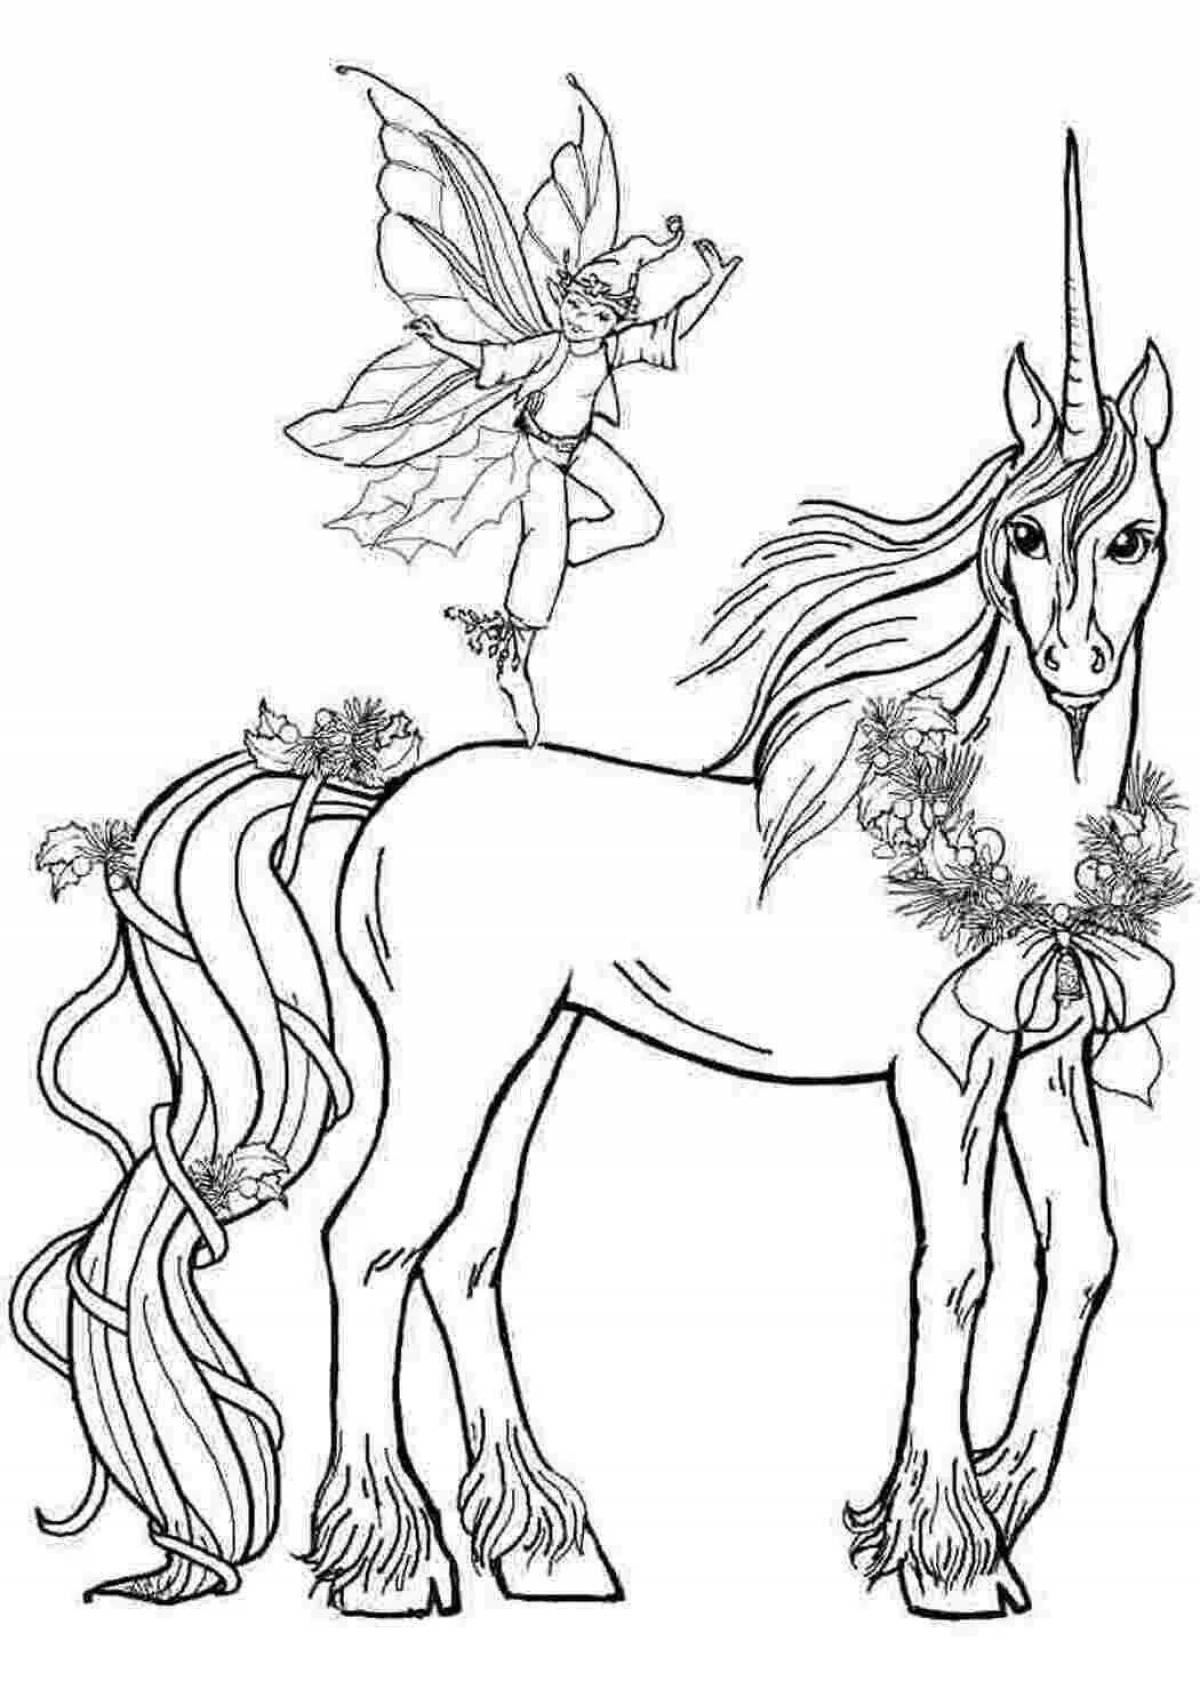 Fairytale coloring book for girls 7 years old unicorn